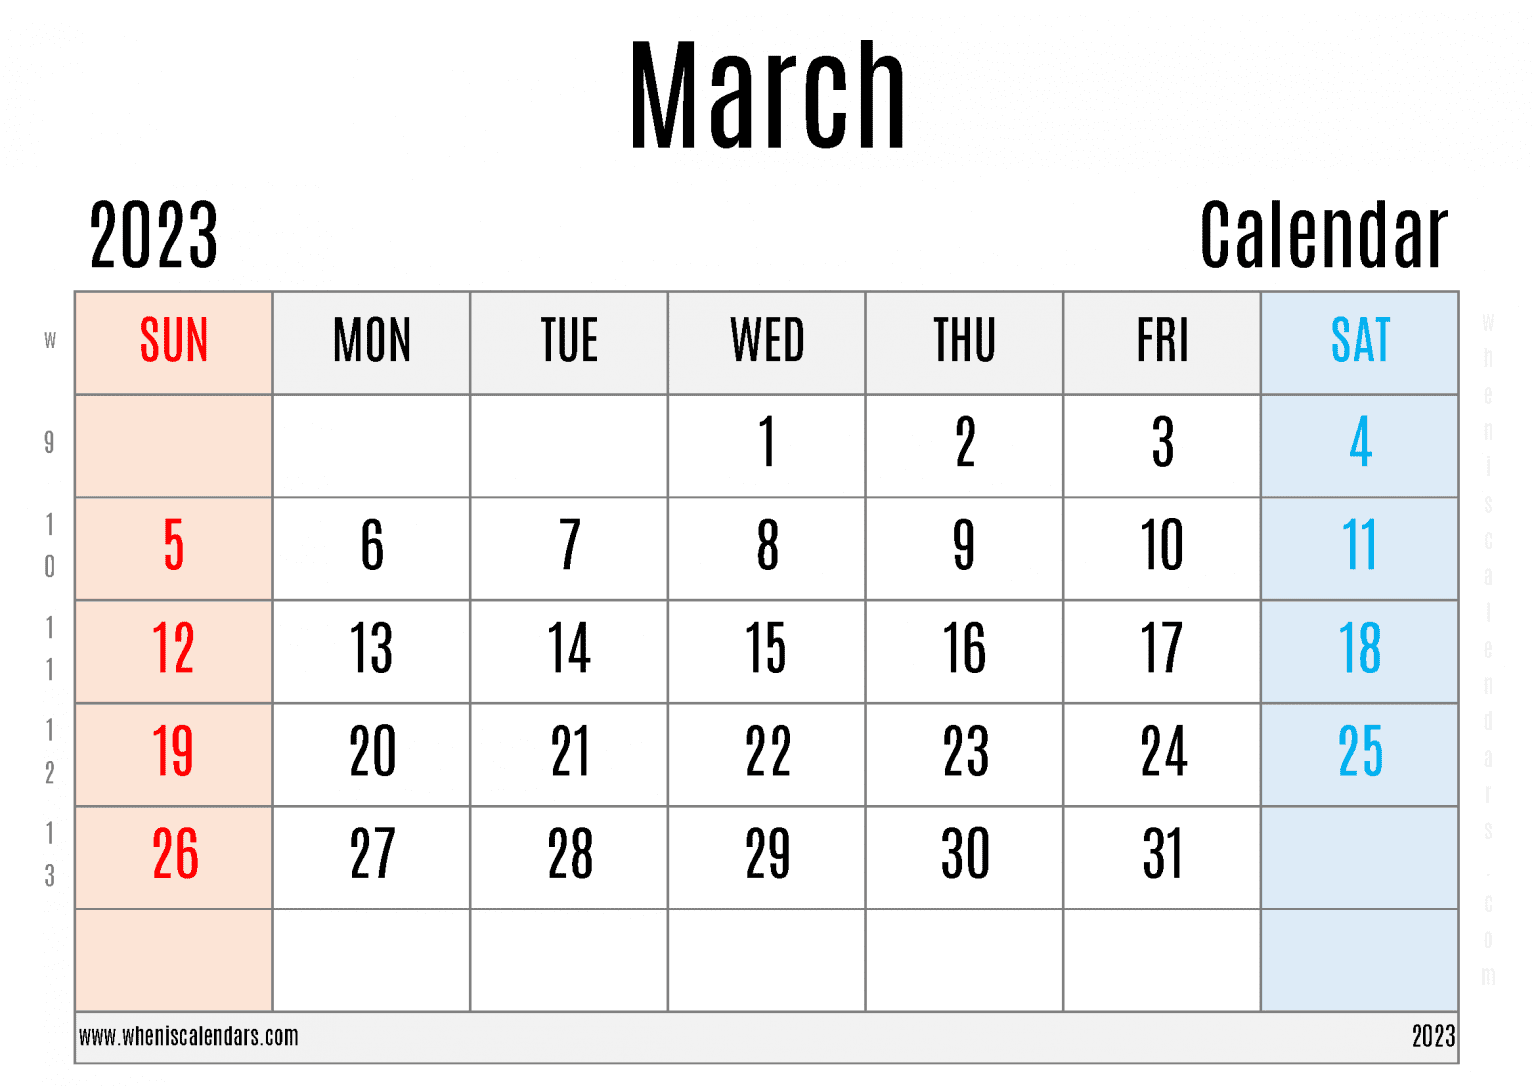 Free Printable March 2023 Calendar With Week Numbers PDF In Landscape